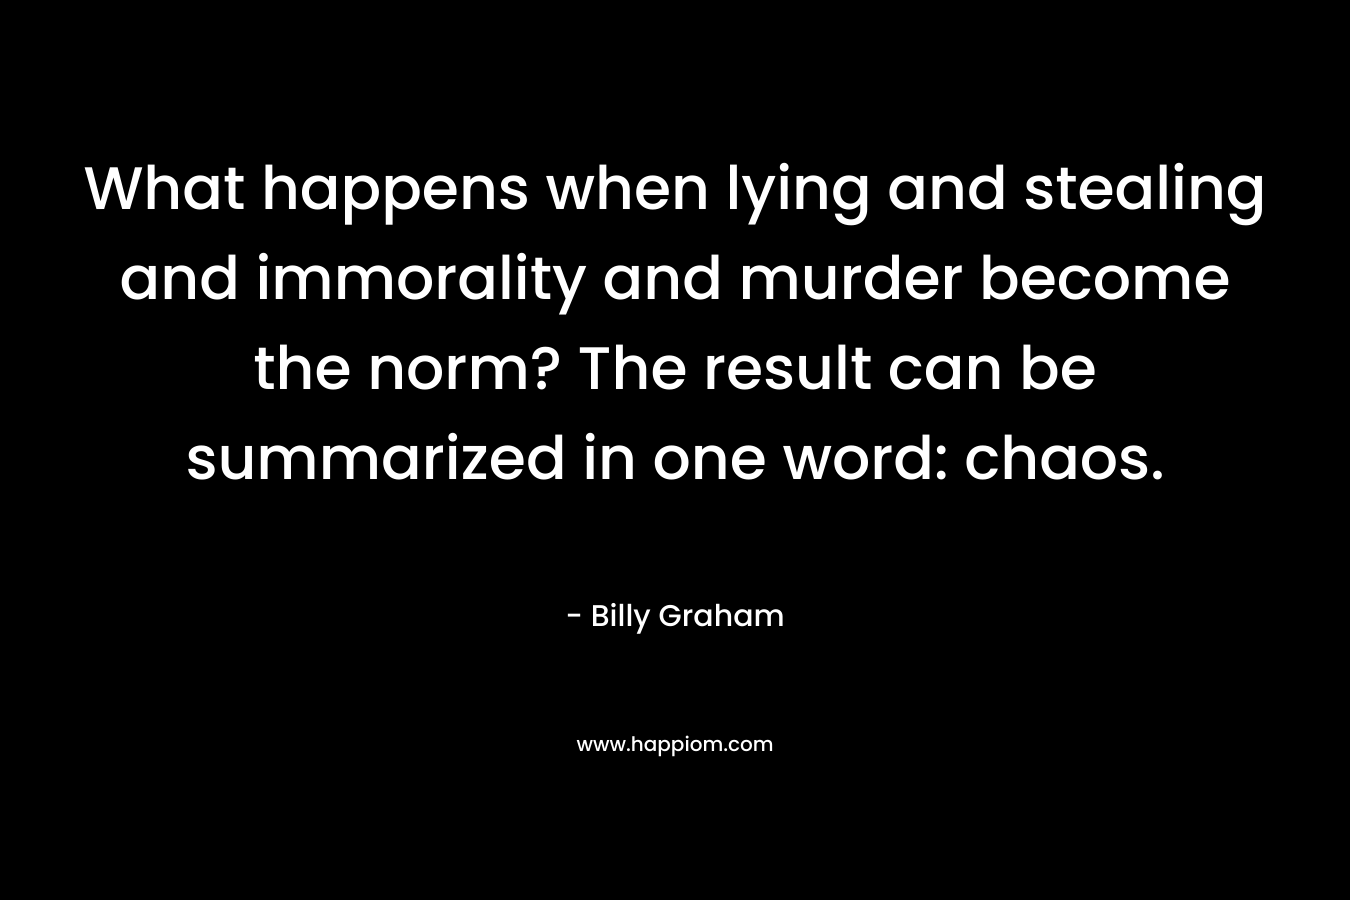 What happens when lying and stealing and immorality and murder become the norm? The result can be summarized in one word: chaos.